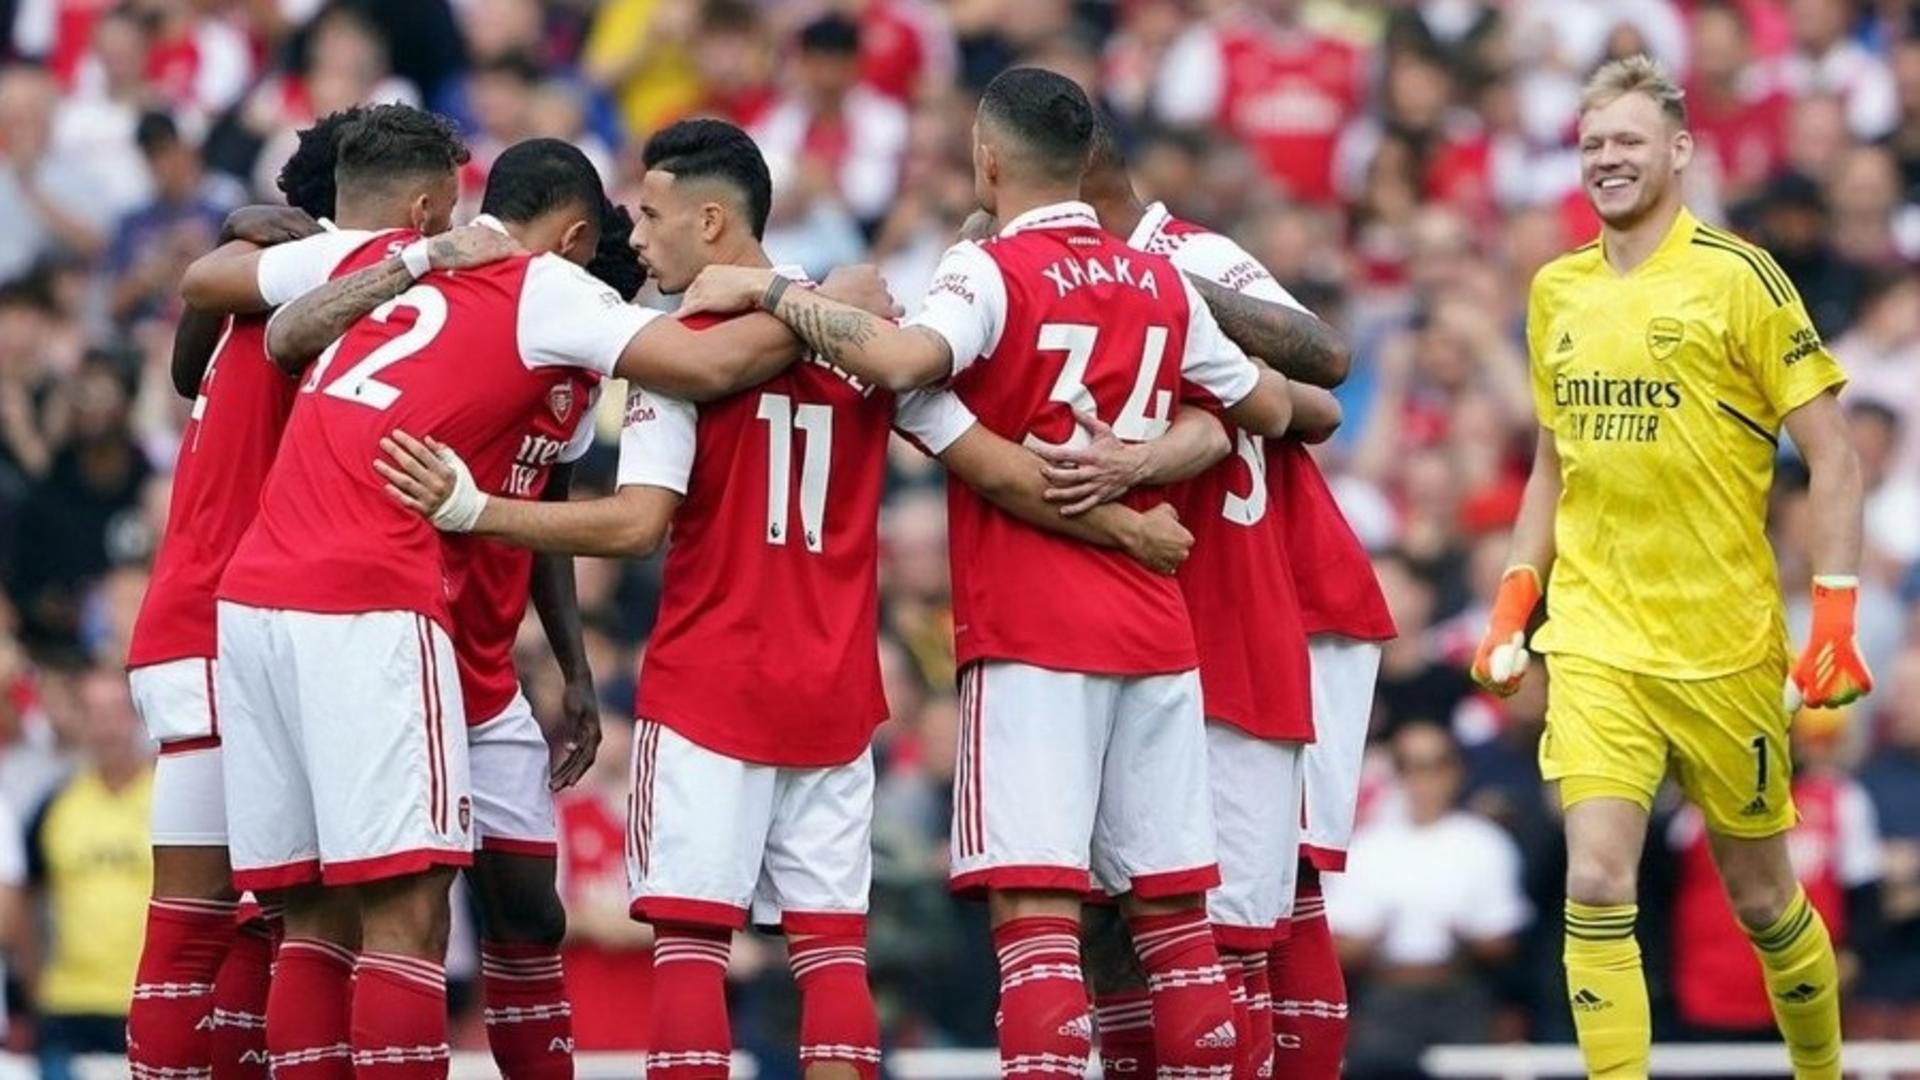 Arsenal Vs FC Nurnberg Live Streaming: Where To Watch Arsenal Friendly  Match Live In India